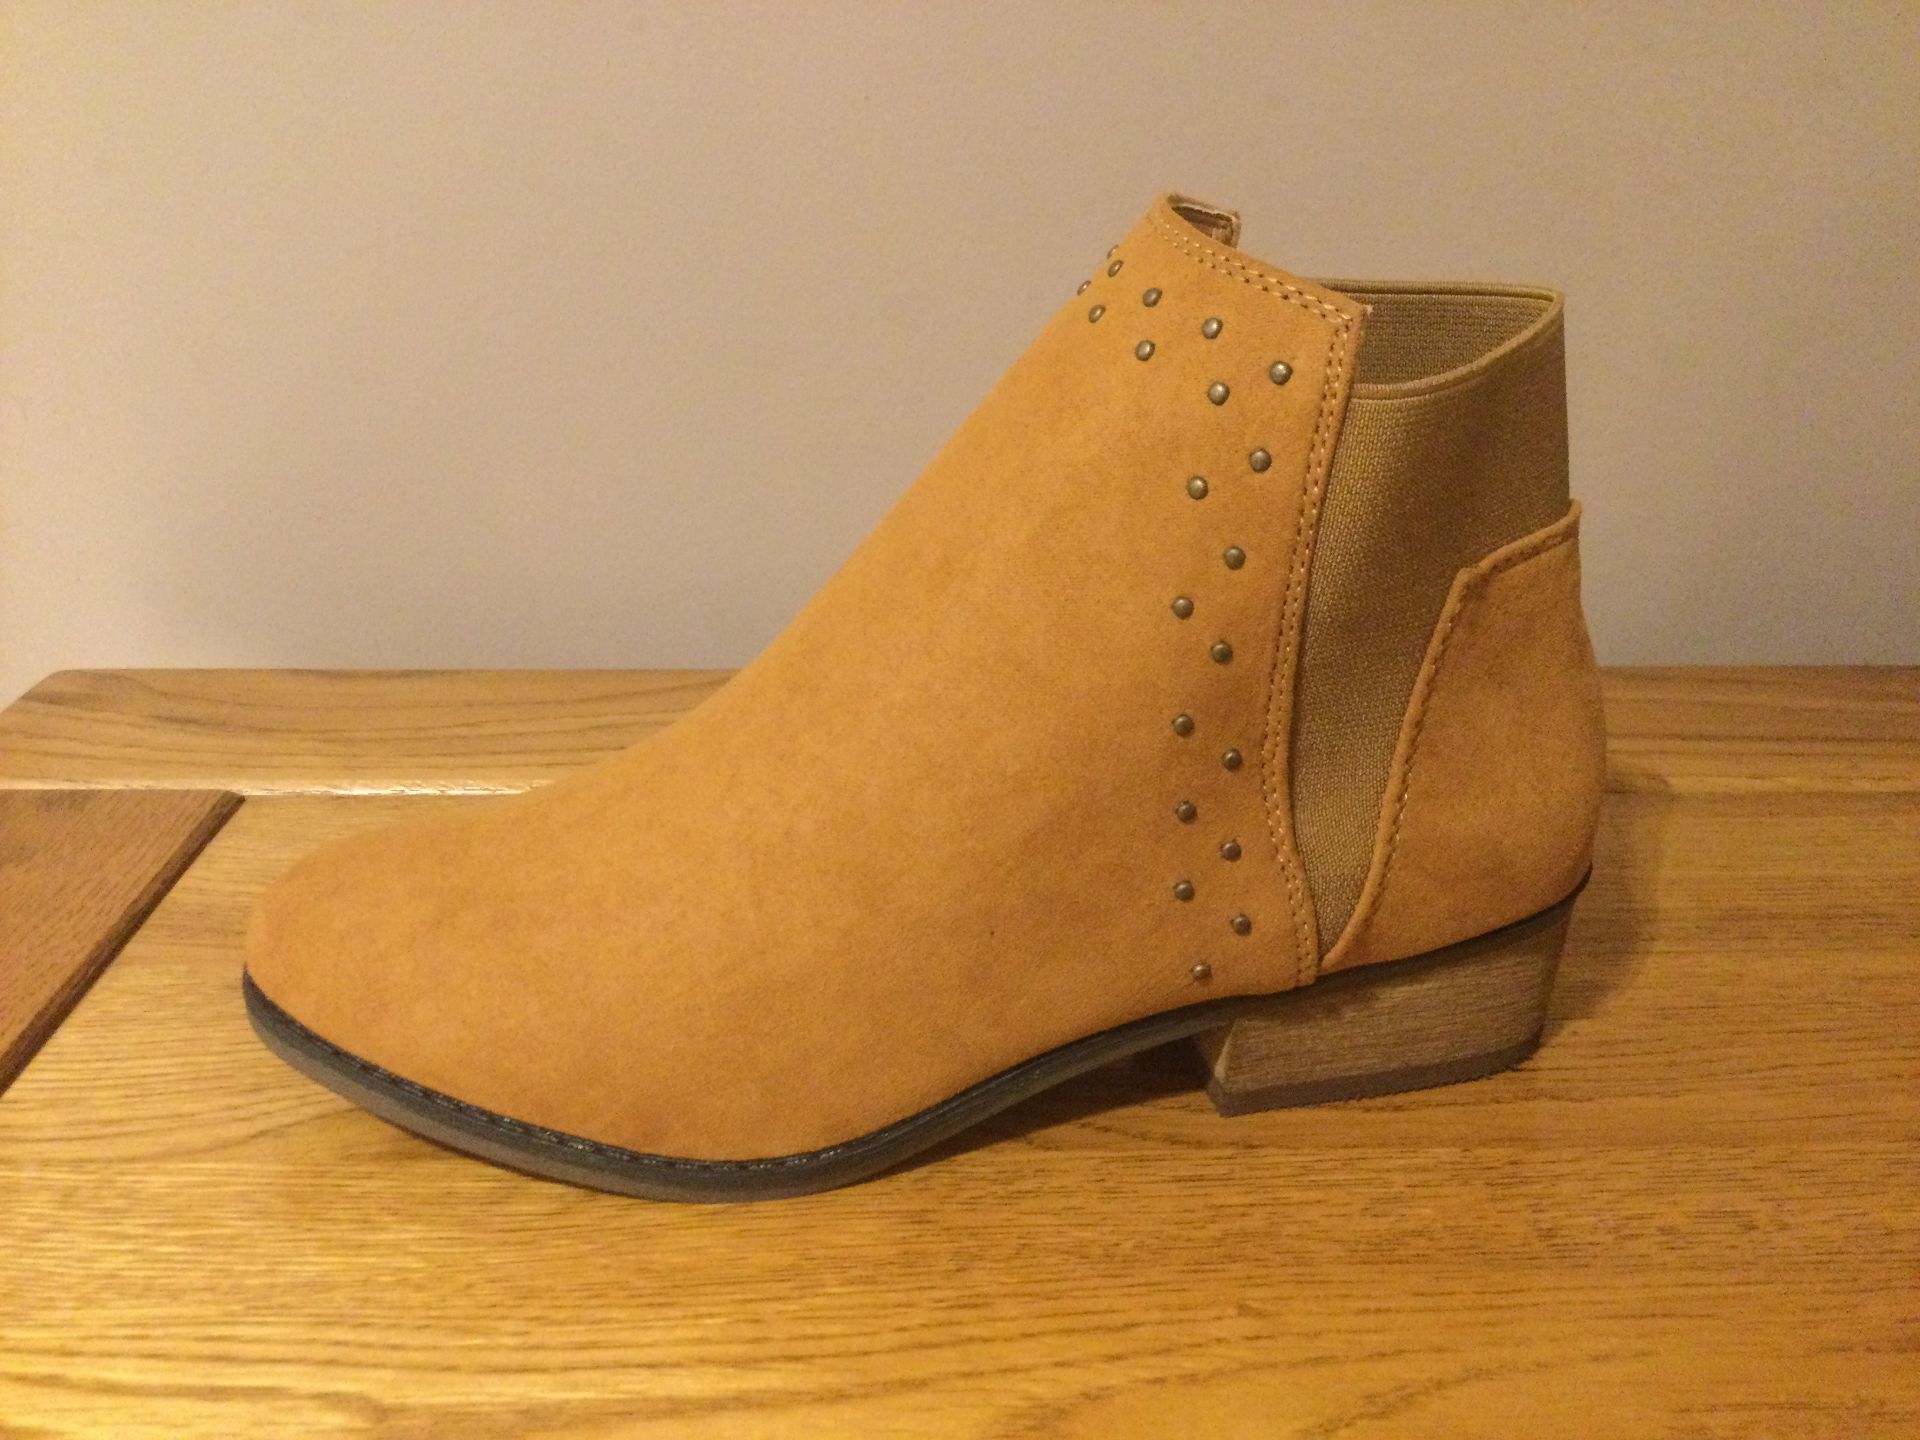 Dolcis “Wendy” Low Heel Ankle Boots, Size 3, Tan - New RRP £45.99 - Image 3 of 7